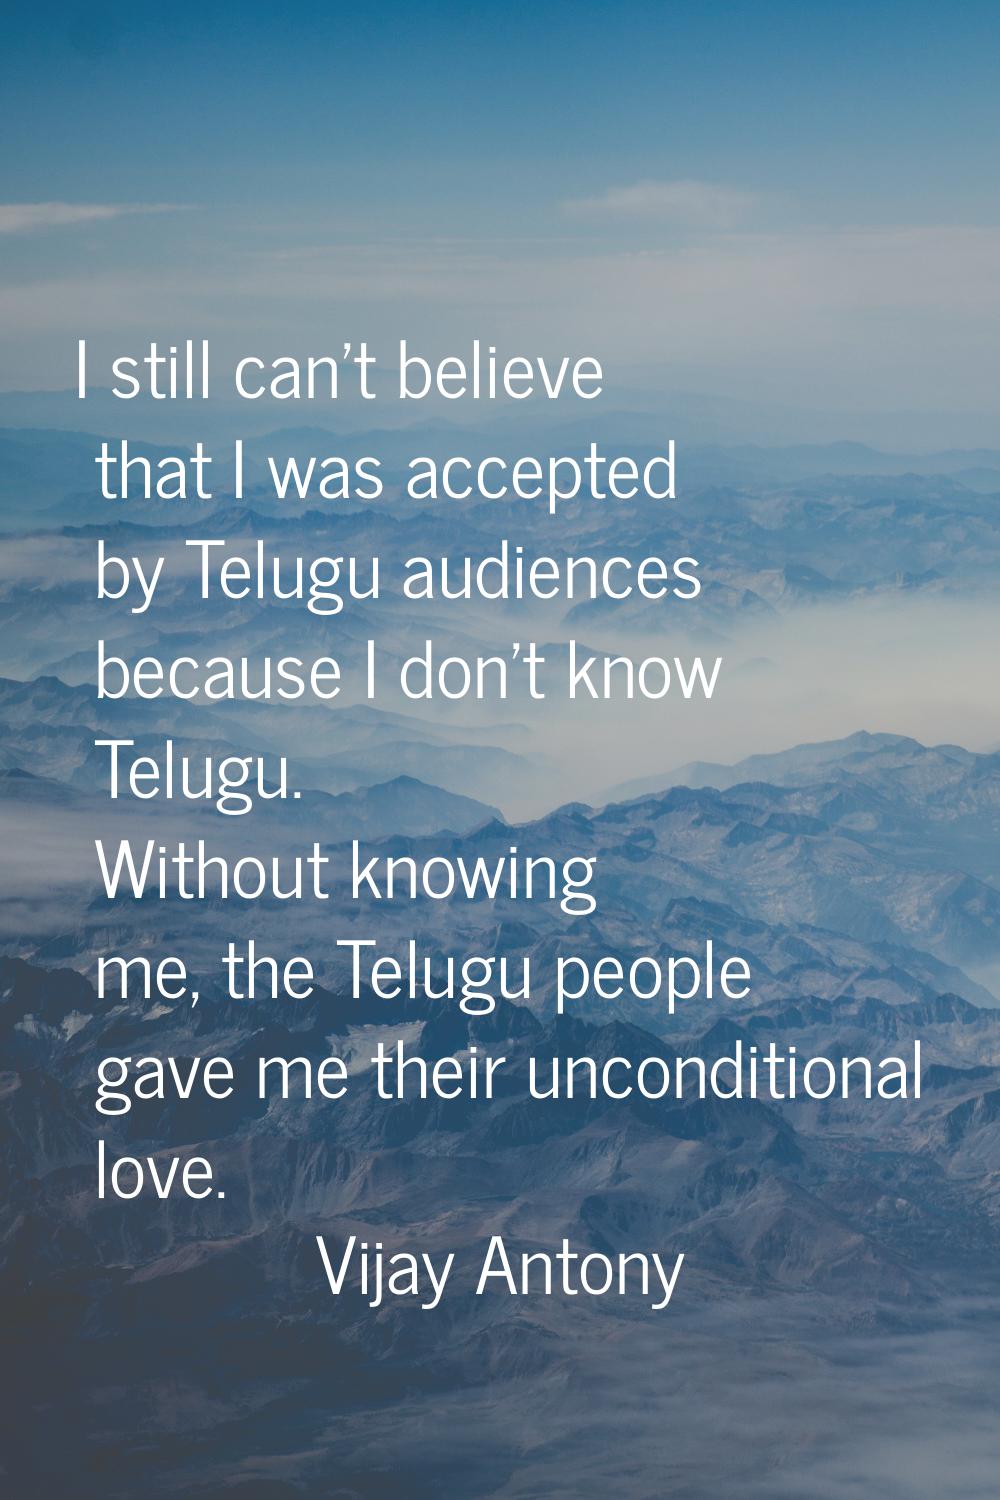 I still can't believe that I was accepted by Telugu audiences because I don't know Telugu. Without 